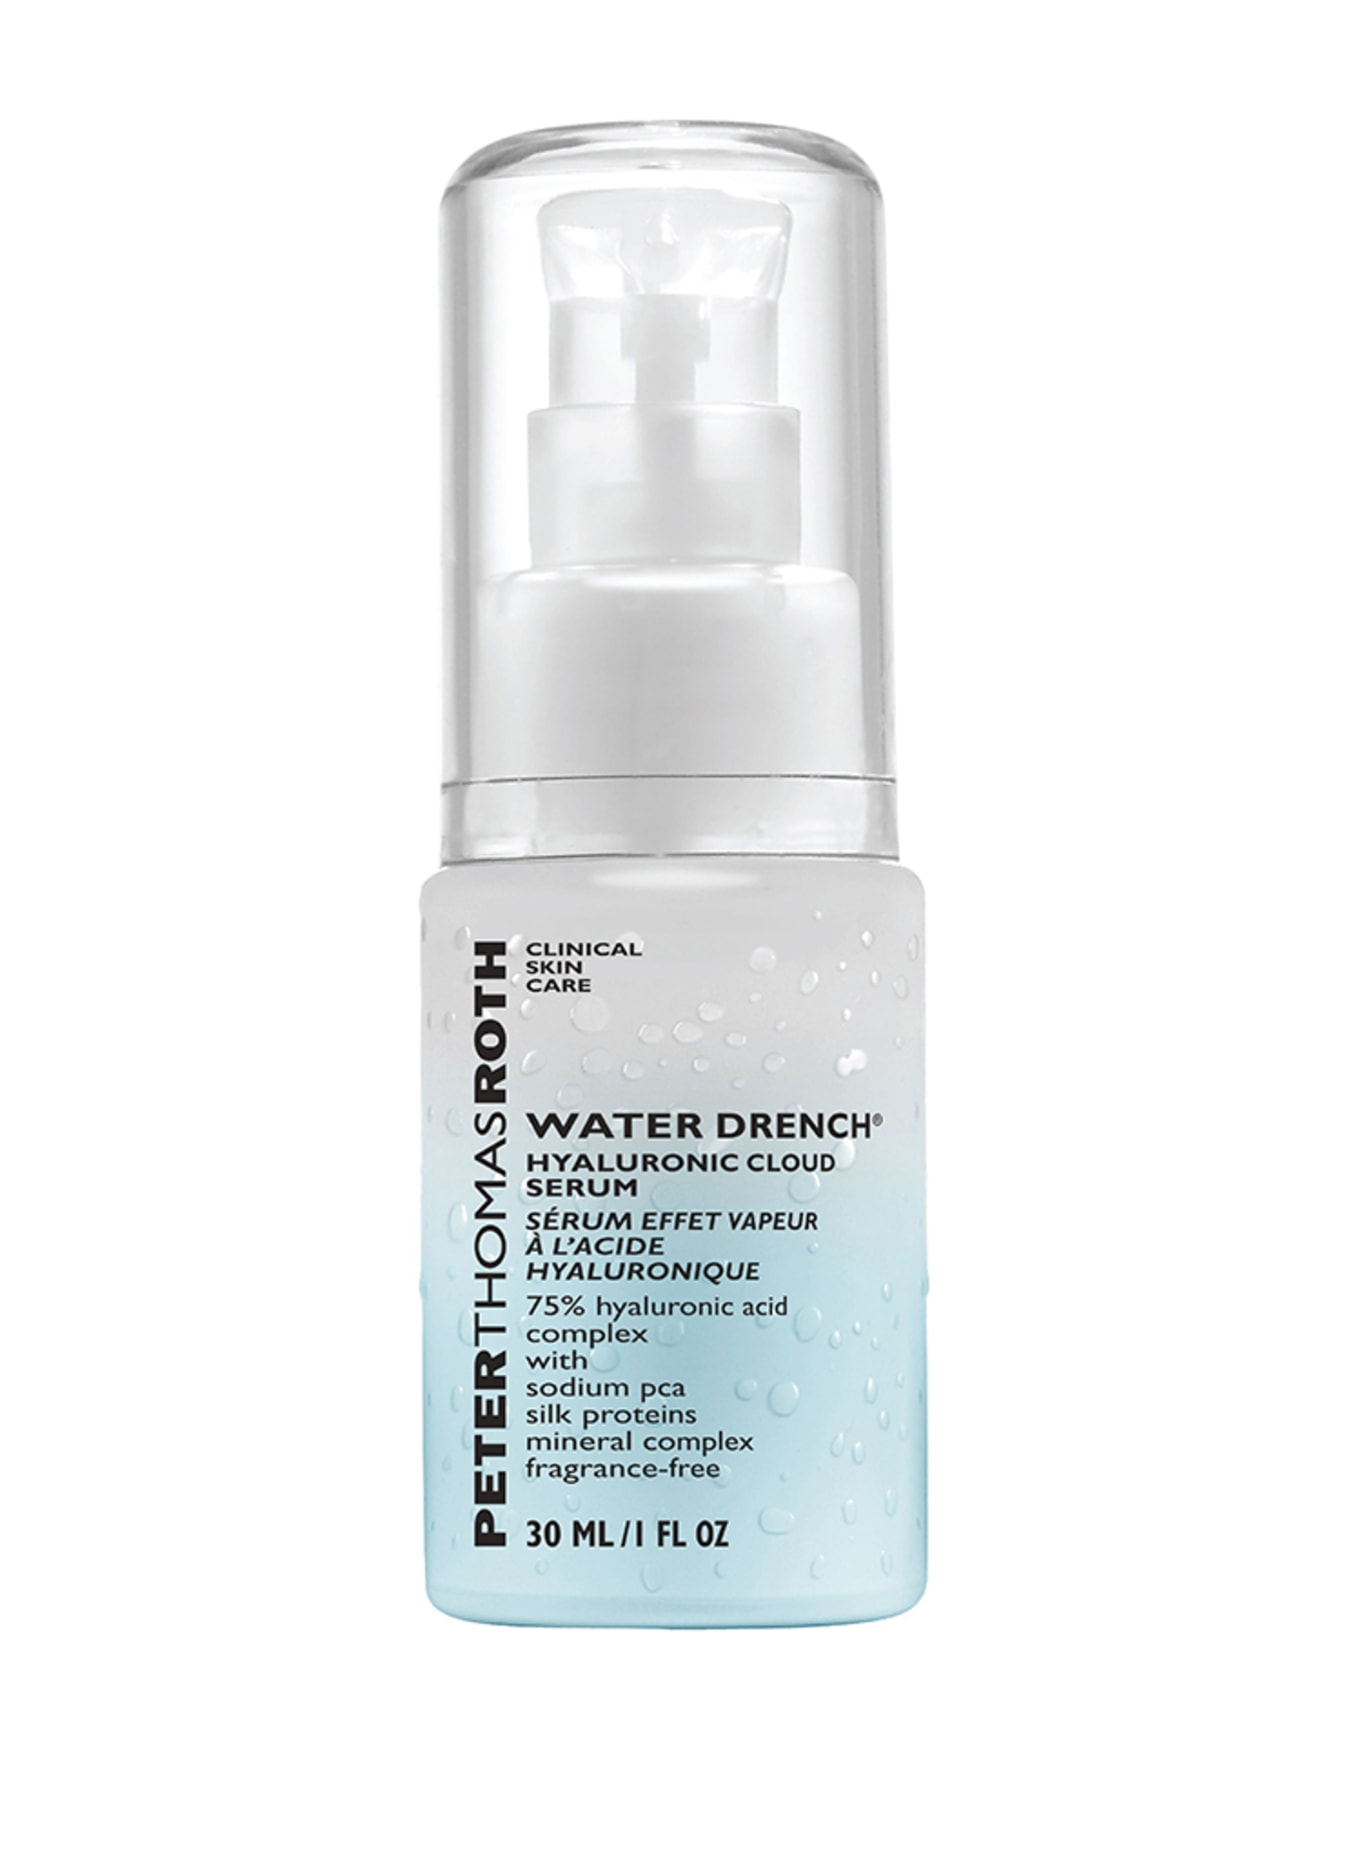 PETER THOMAS ROTH WATER DRENCH (Obrázek 1)